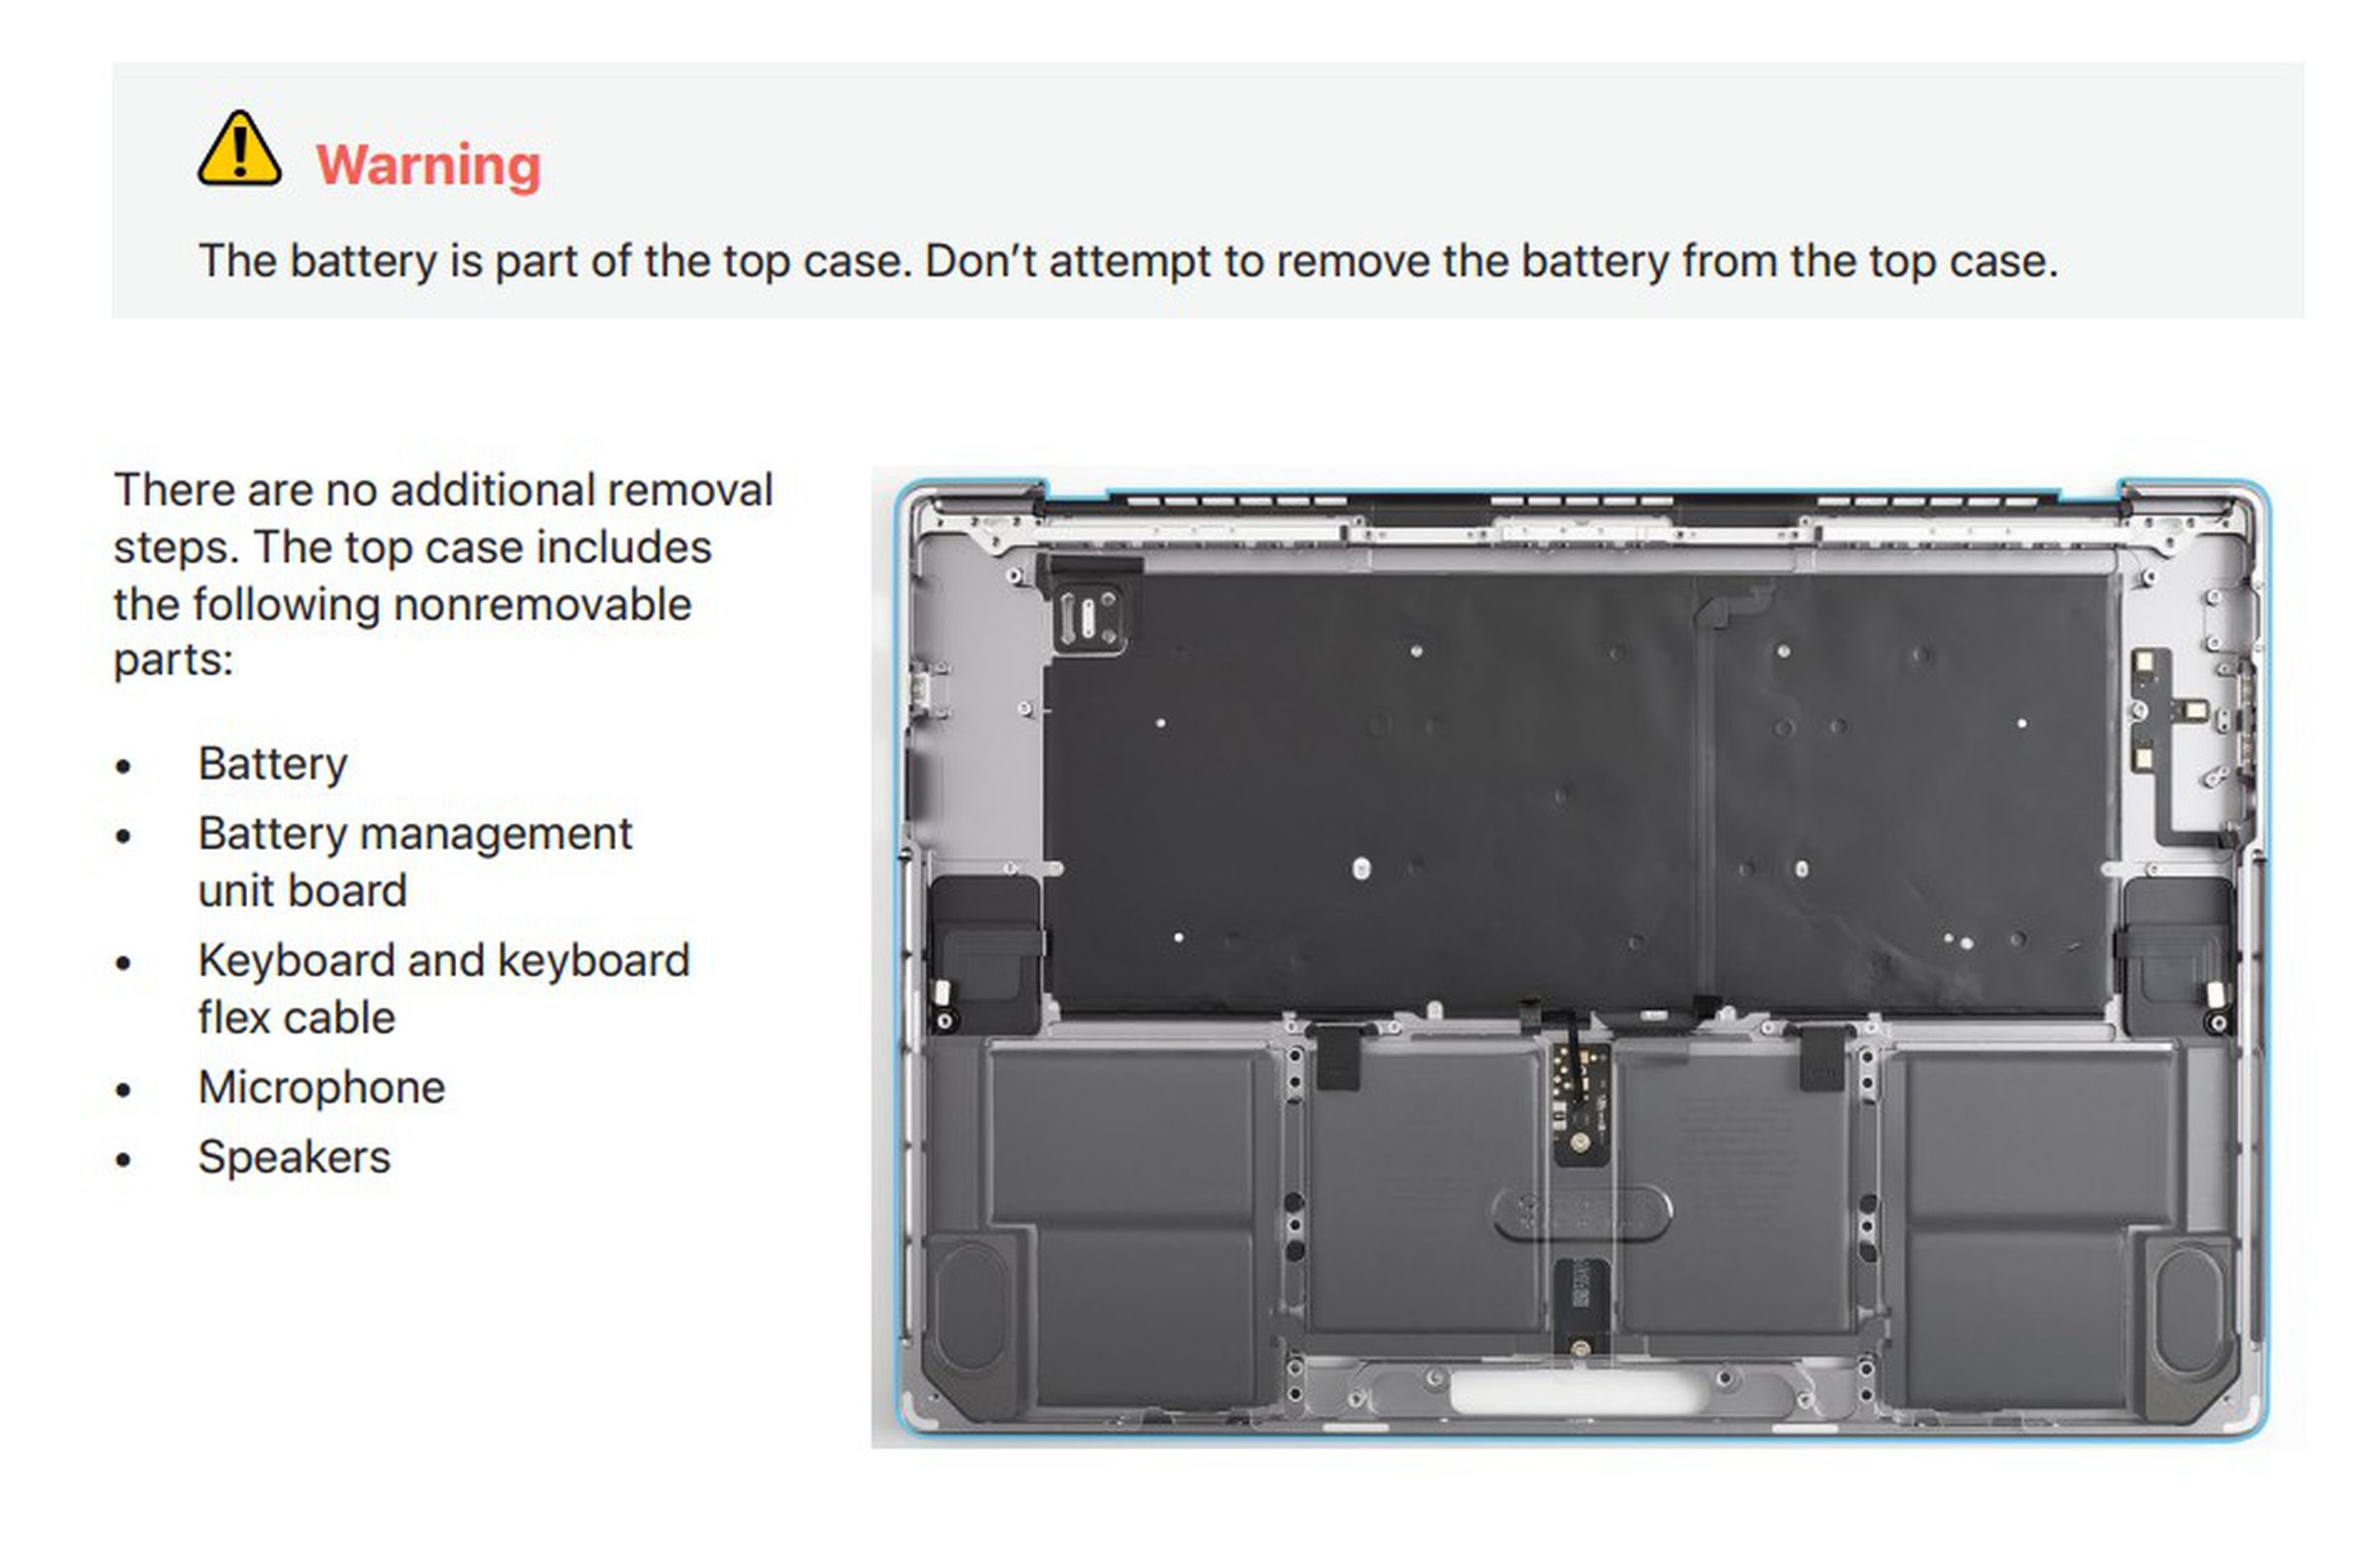 The battery, speakers, microphone, and keyboard are fixed to the top case of 2021 MacBook Pros.